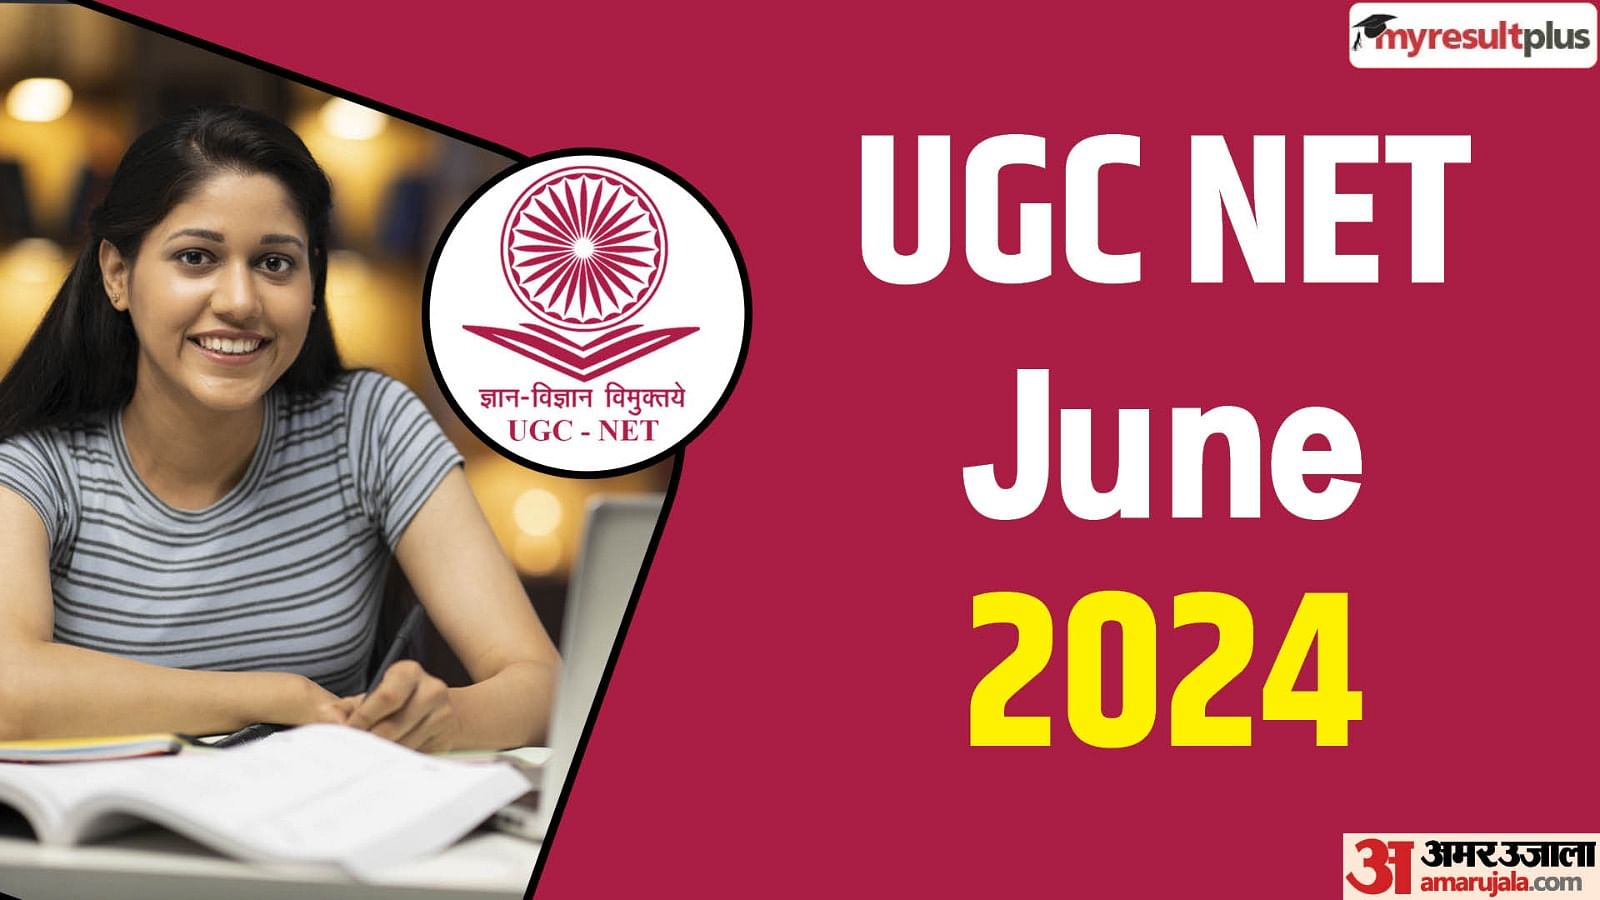 UGC NET 2024 registration window closing today, Check how to apply and read all exam details here